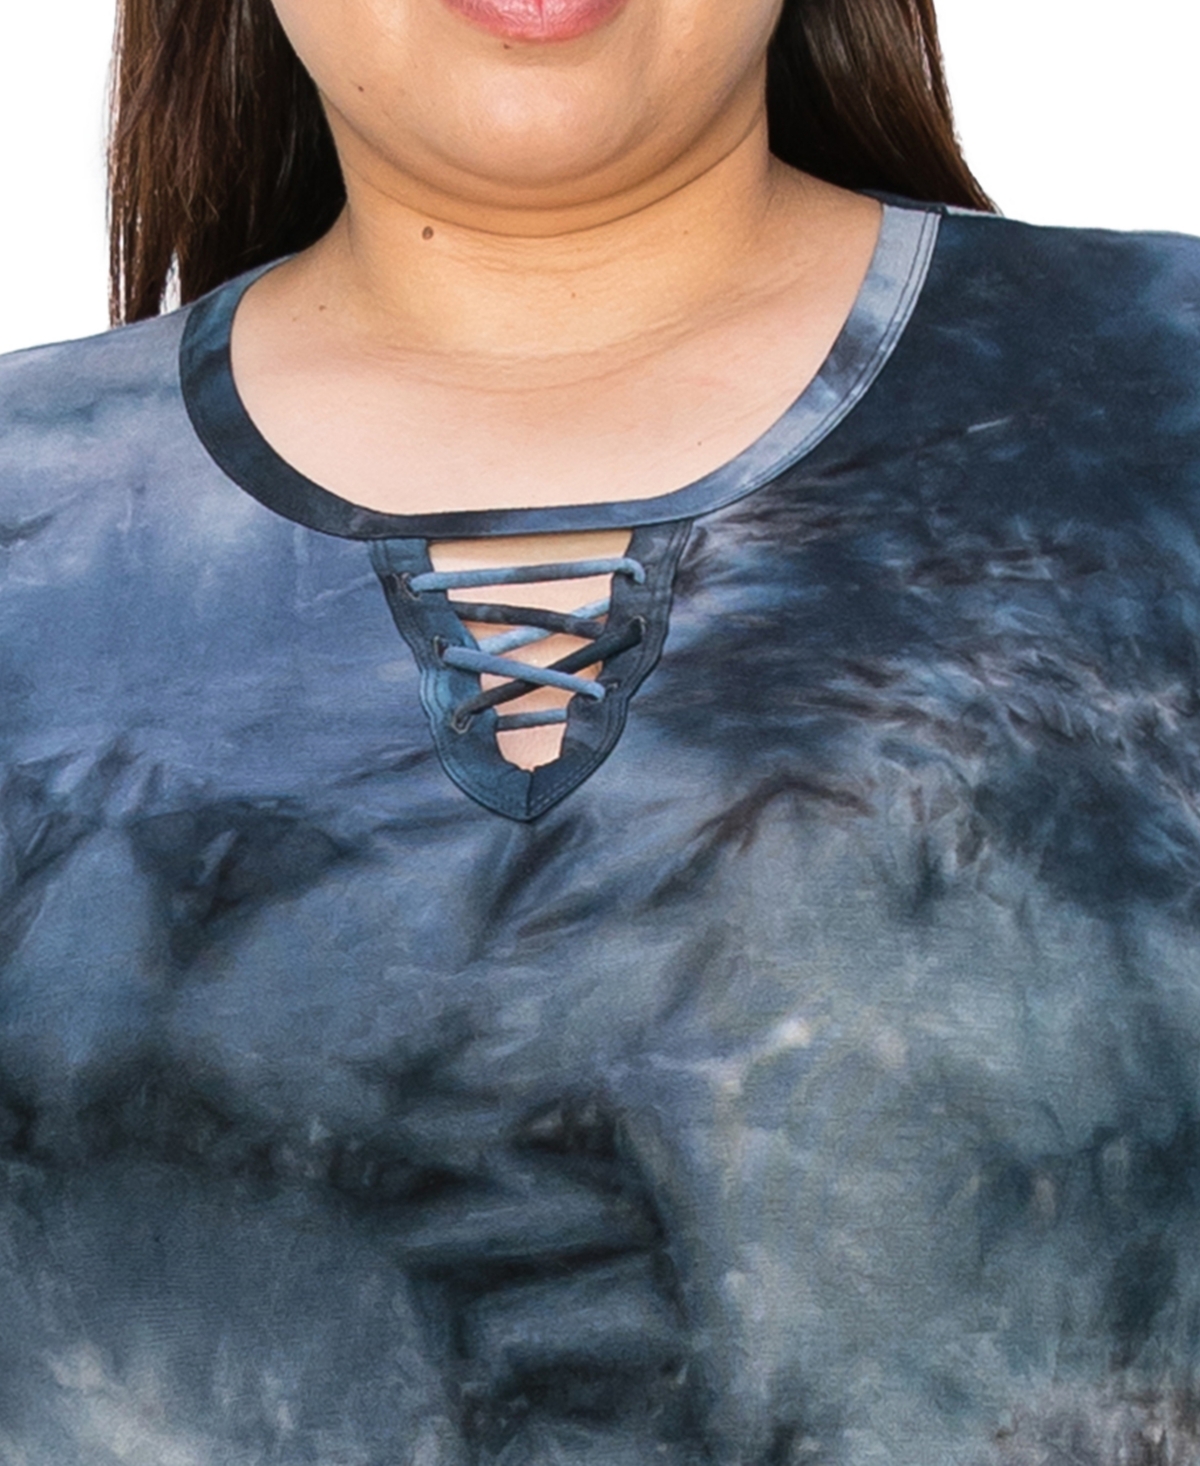 Shop Coin 1804 Plus Tie Dye Lace Up Short Sleeve Top In Teal Grey